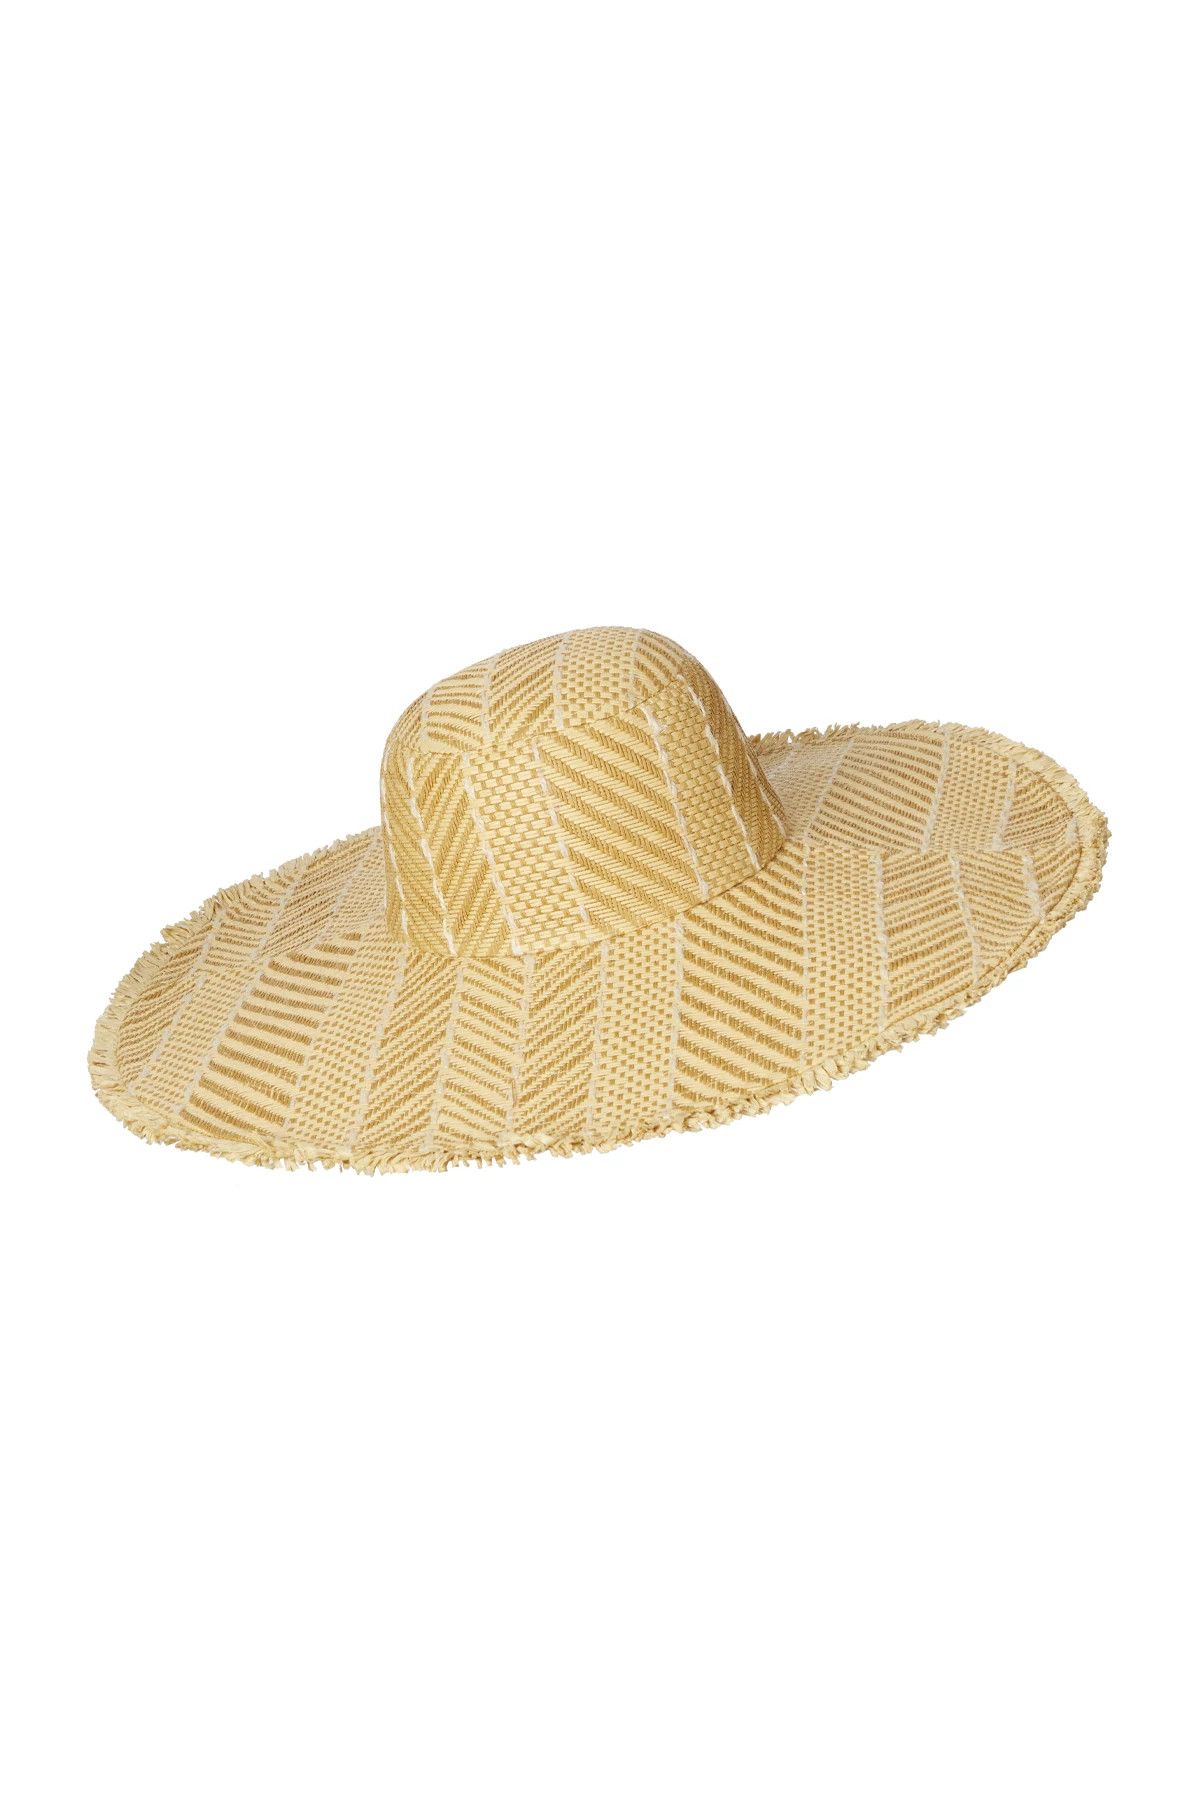 Textured Sun Hat | Everything But Water